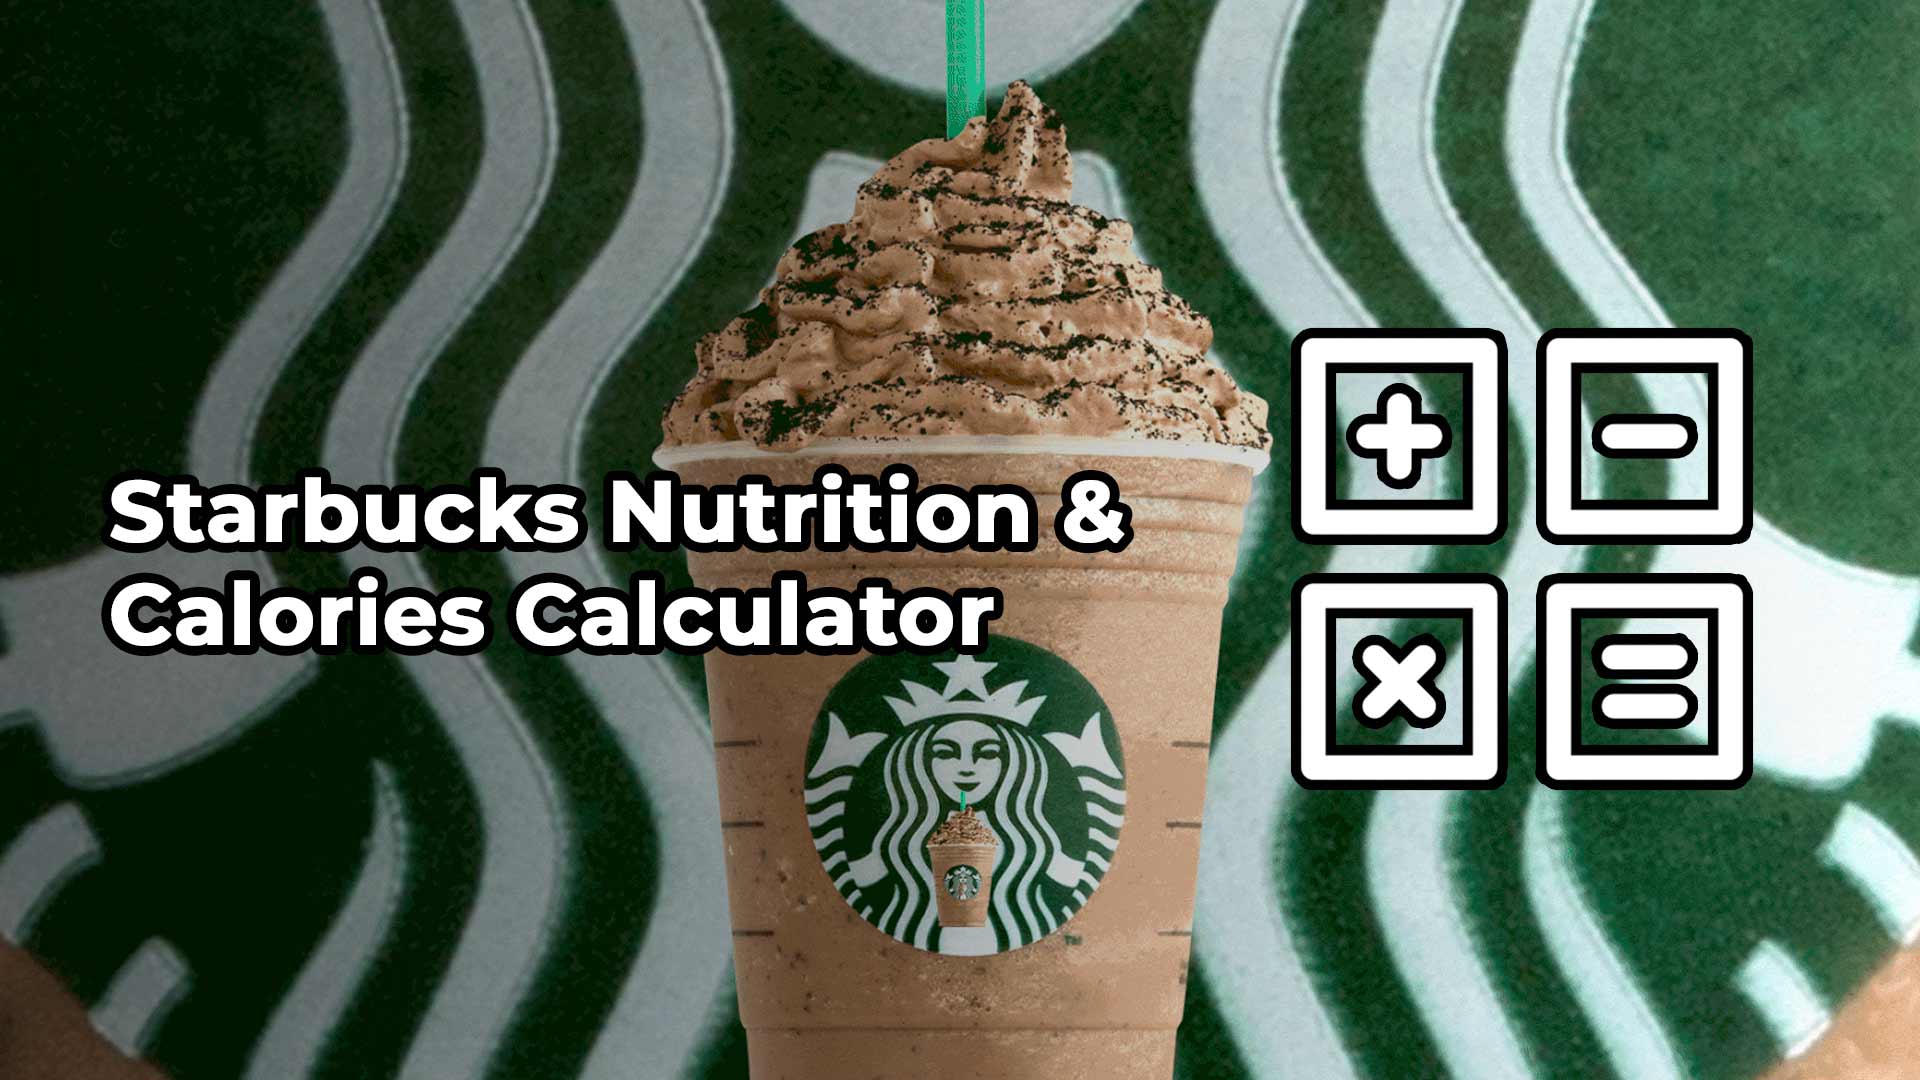 Starbucks Nutrition and Calories Calculator - Estimate Calories for Coffee and Drinks